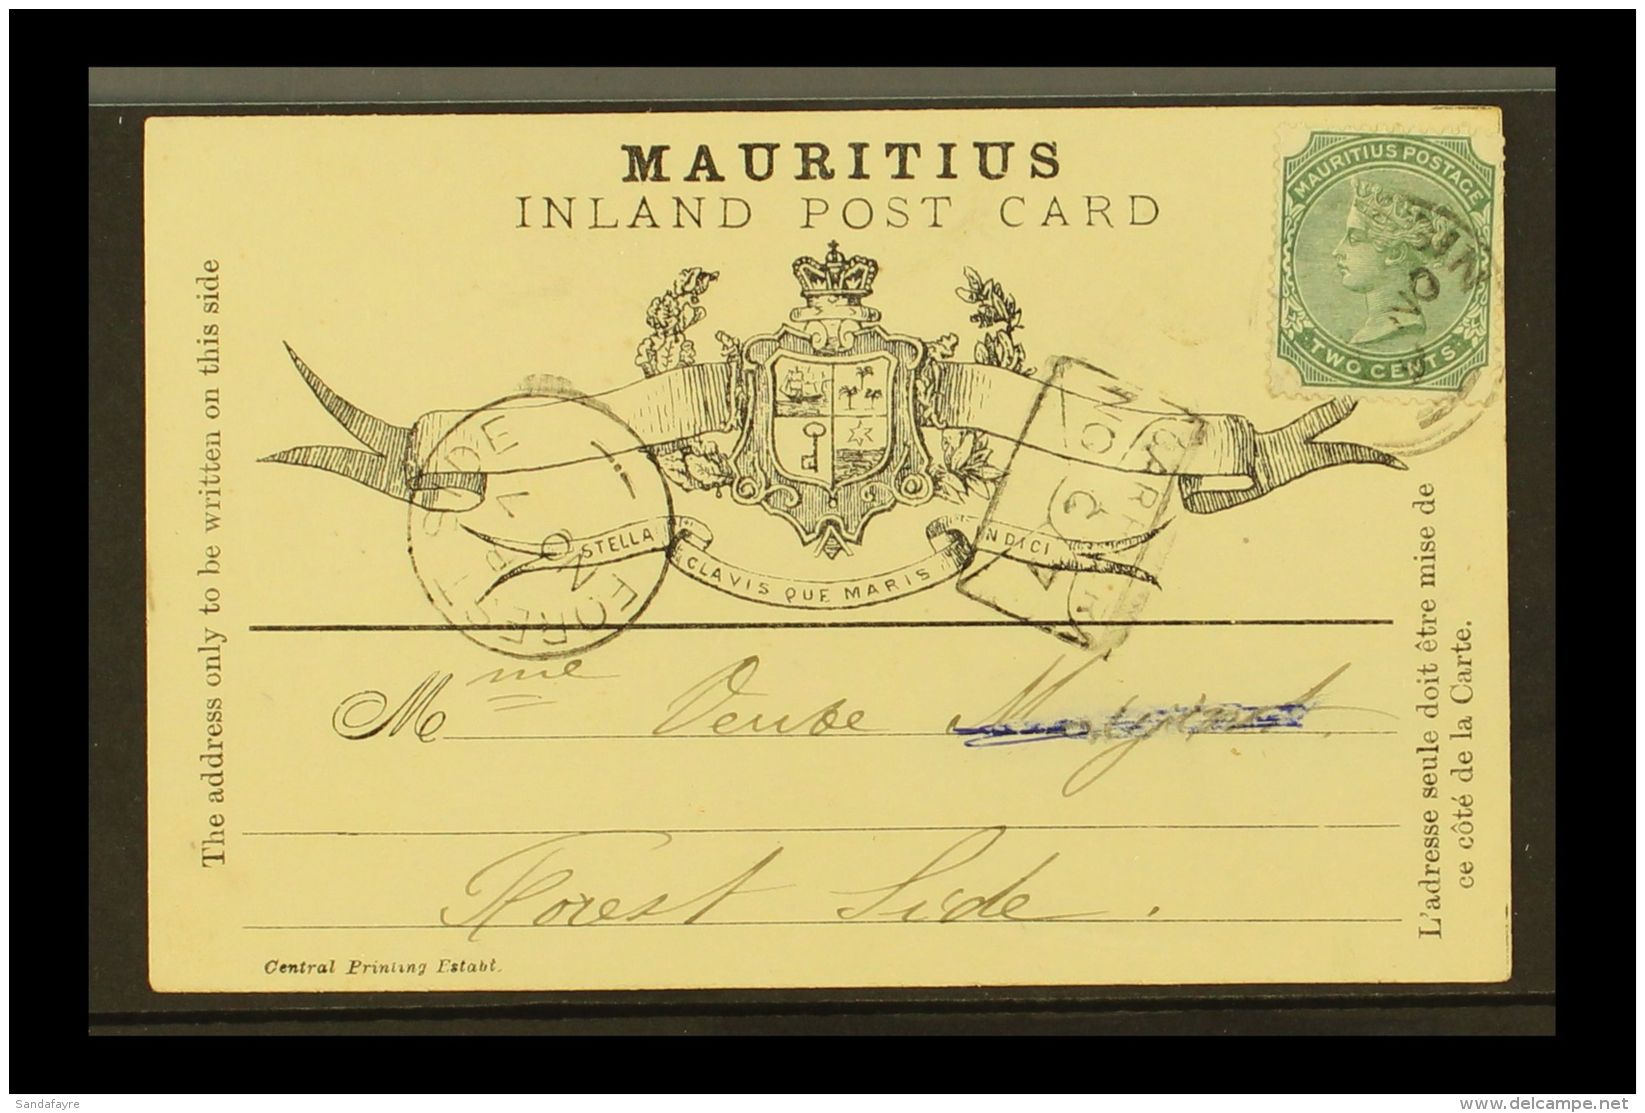 1899 (7 Nov) Formular Card With QV 2c Green Adhesive Tied By Beau Bassin Cds; Alongside "envelope" Carrier Cachet... - Mauritius (...-1967)